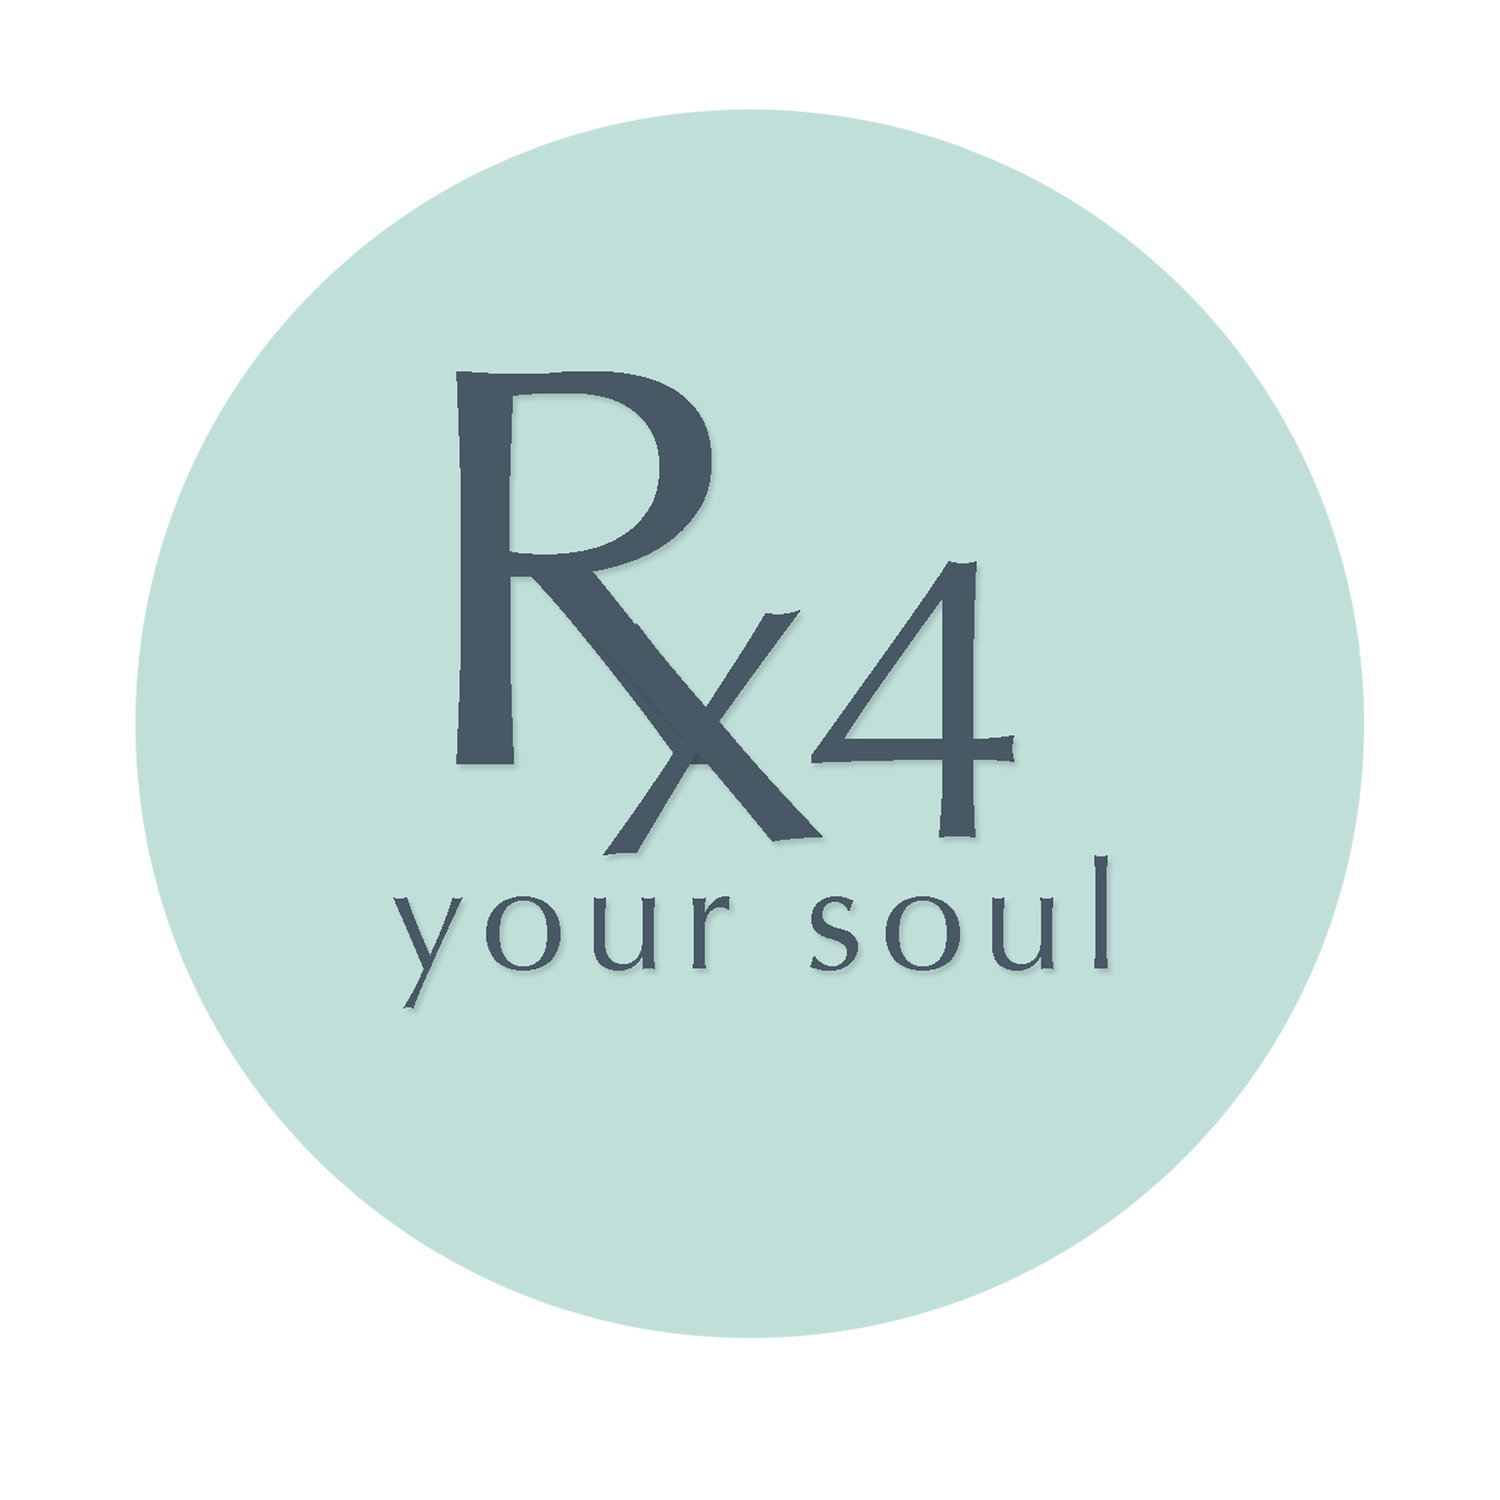 Rx4yoursoul